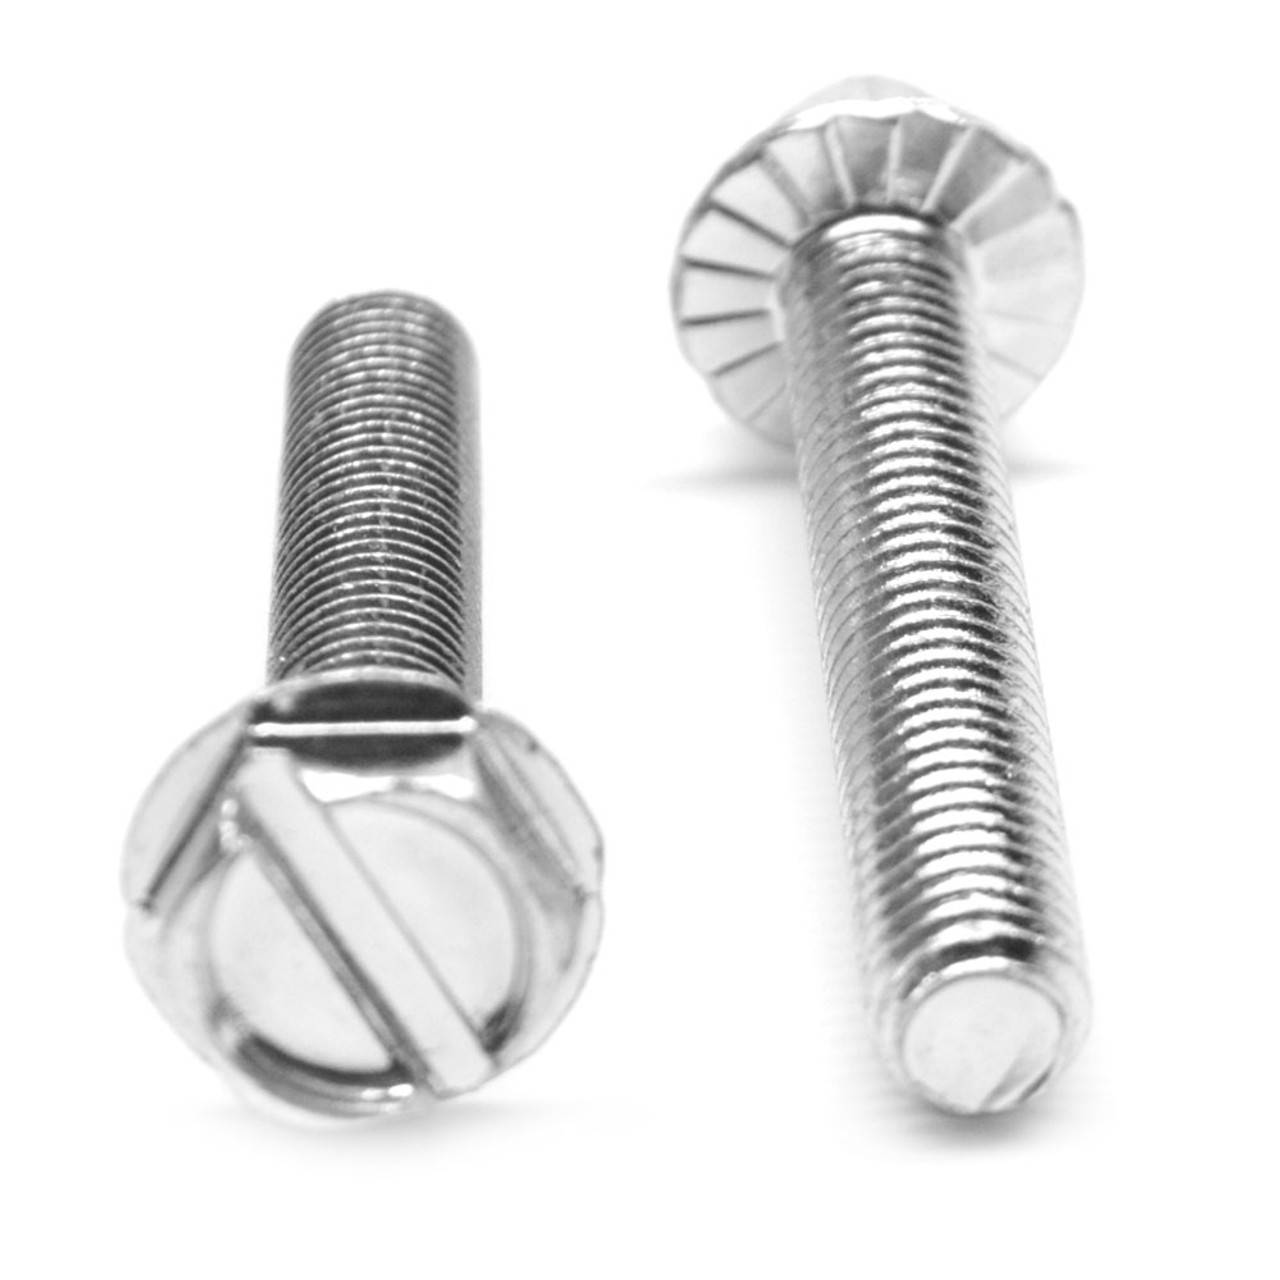 5/16-18 x 1 1/2 Coarse Thread Machine Screw Slotted Hex Washer Head with Serration Low Carbon Steel Zinc Plated